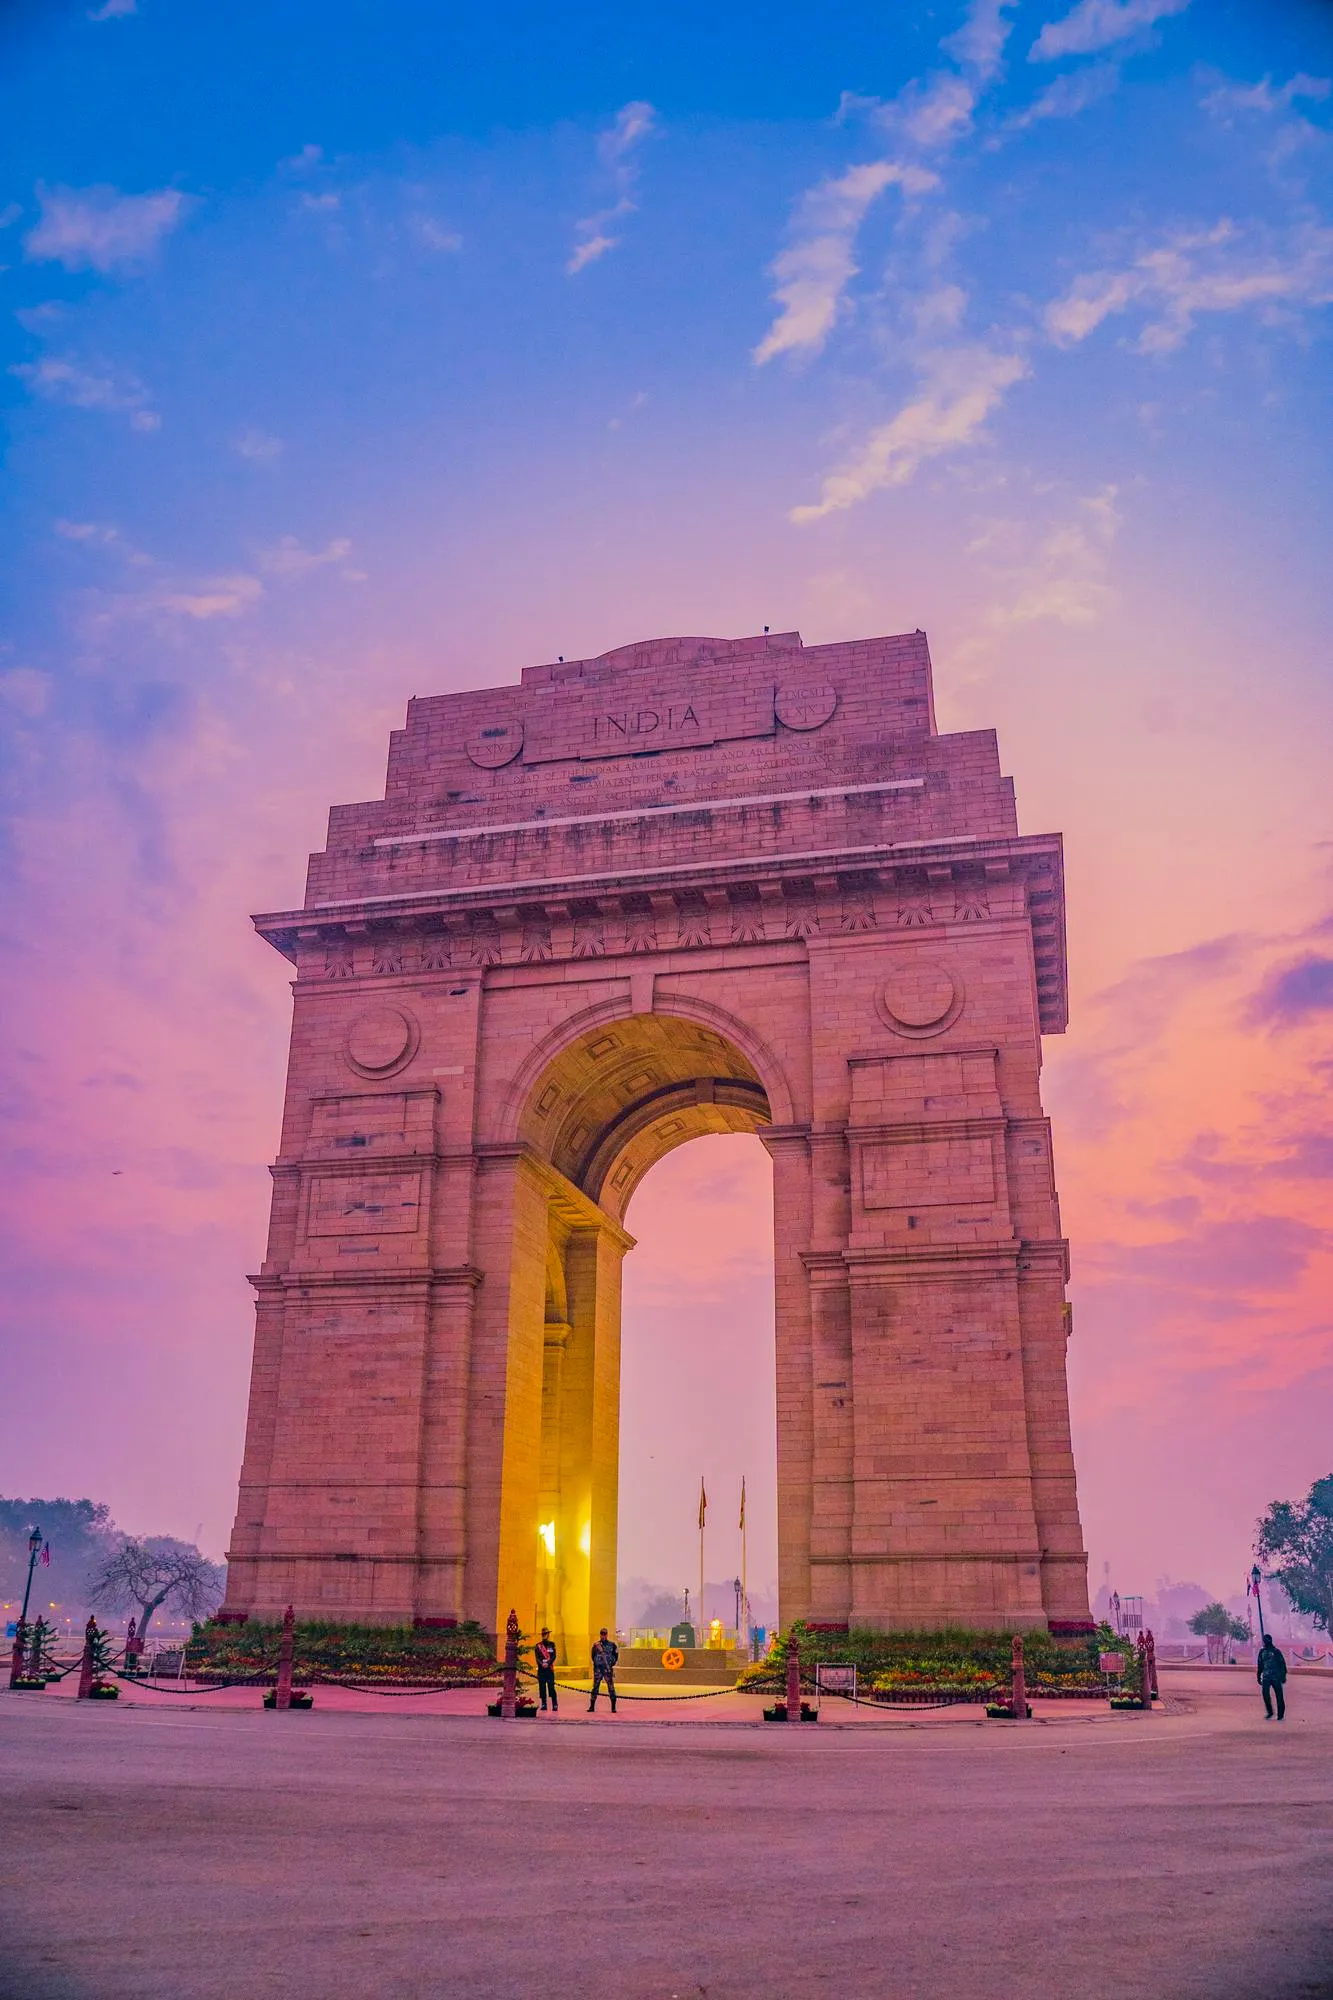 Popular Cab Packages from Delhi: Explore the City and Beyond with Bhavya Holidays